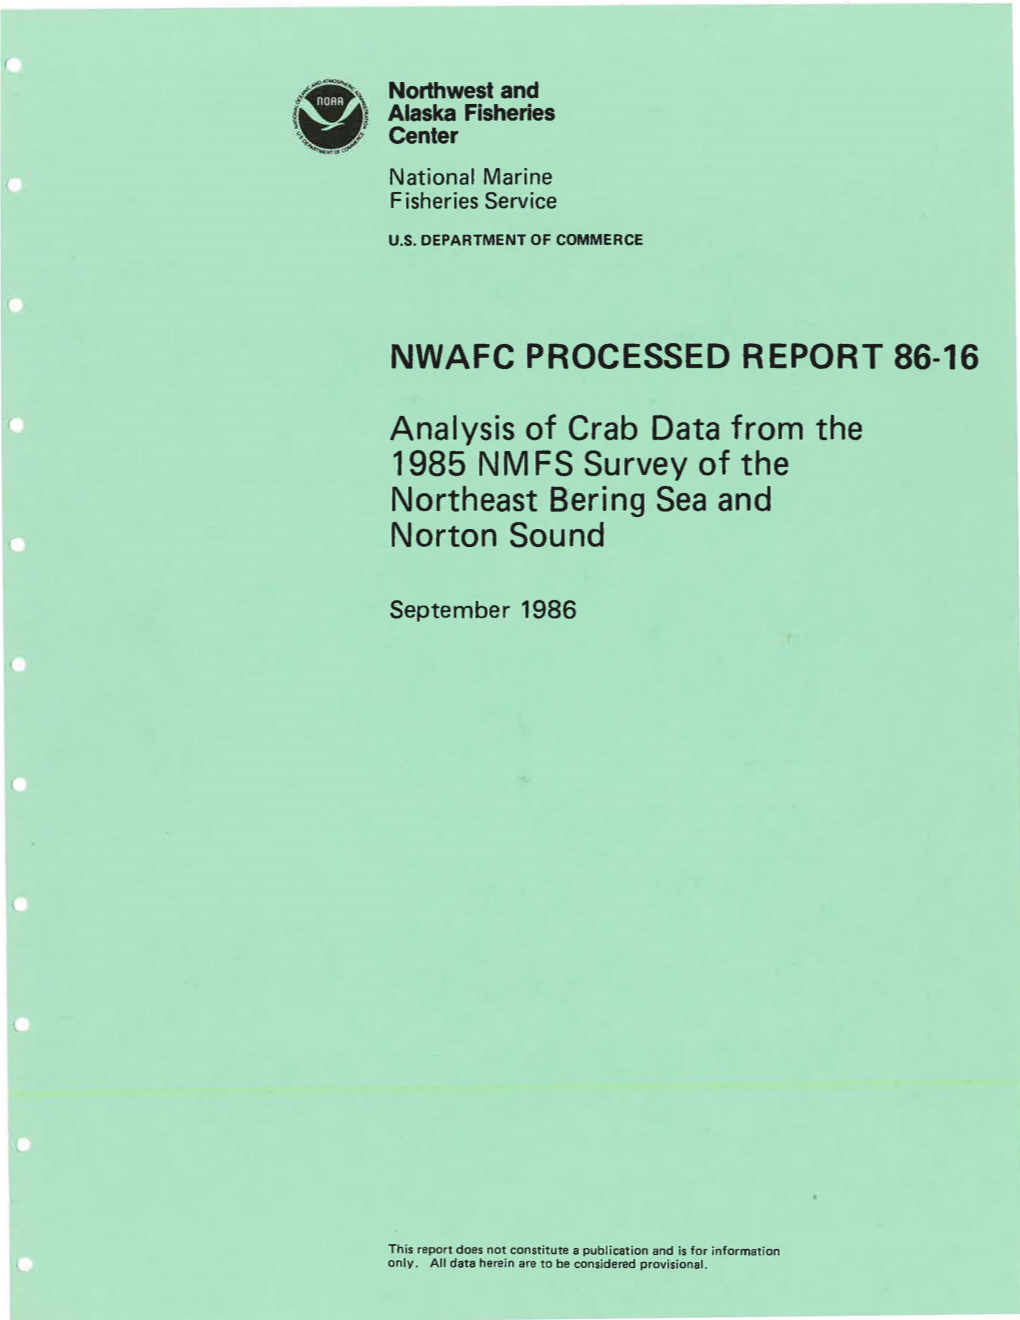 Analysis of Crab Data from the 1985 Nmfs Survey of the Northeast Bering Sea and Norton Sound